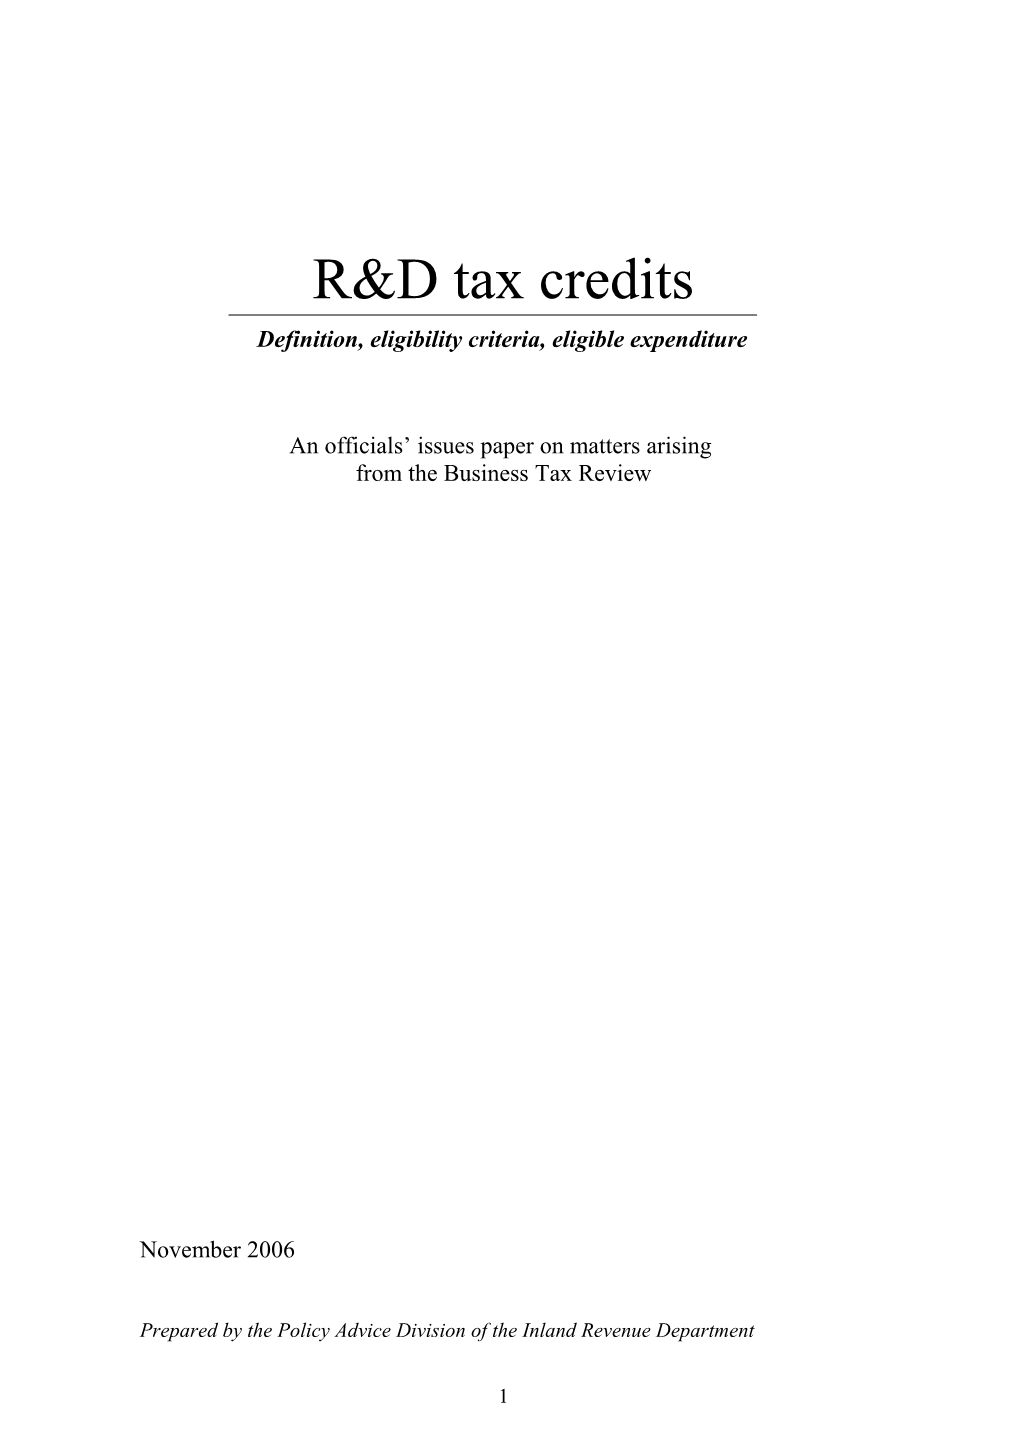 R&D Tax Credits - Definition, Eligibility Criteria, Eligible Expendenture